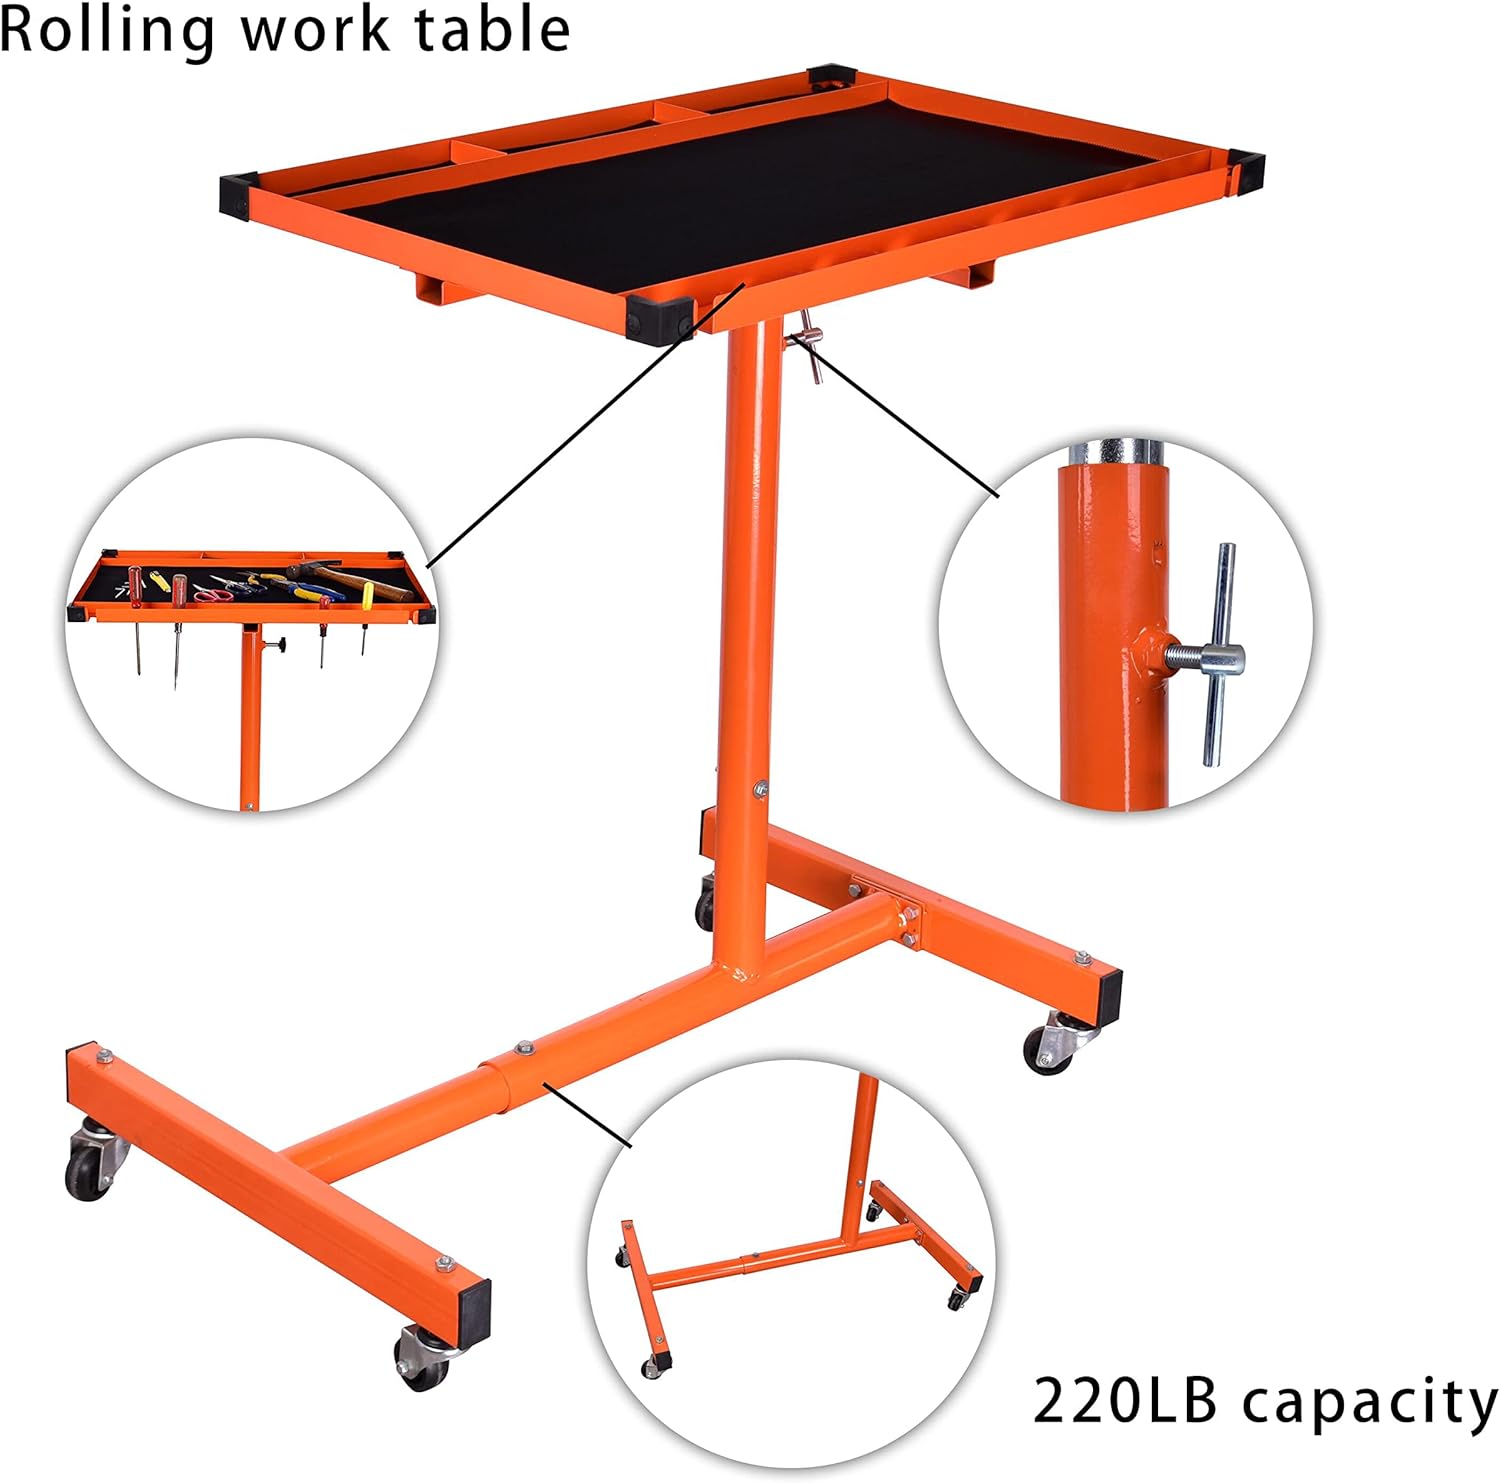 Aain &#194;&#174; L018A Heavy-Duty Adjustable Work Table with Wheels, Mechanic Tray,Mobile Rolling Tool Table, Orange